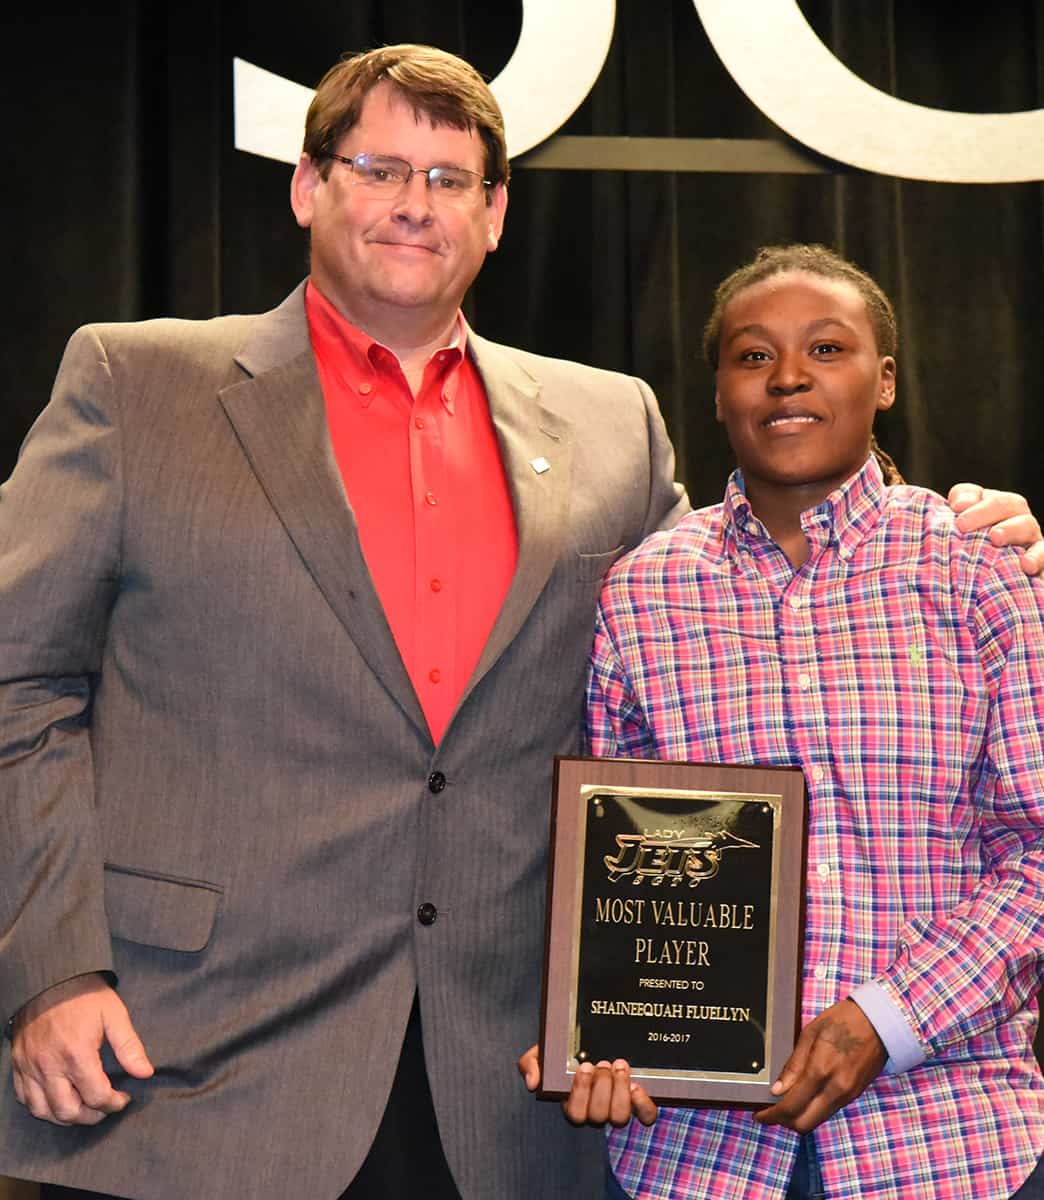 SGTC Athletic Director and Lady Jets head coach James Frey is shown above with the Lady Jets 2017 MVP Shaineequah Fluellyn.